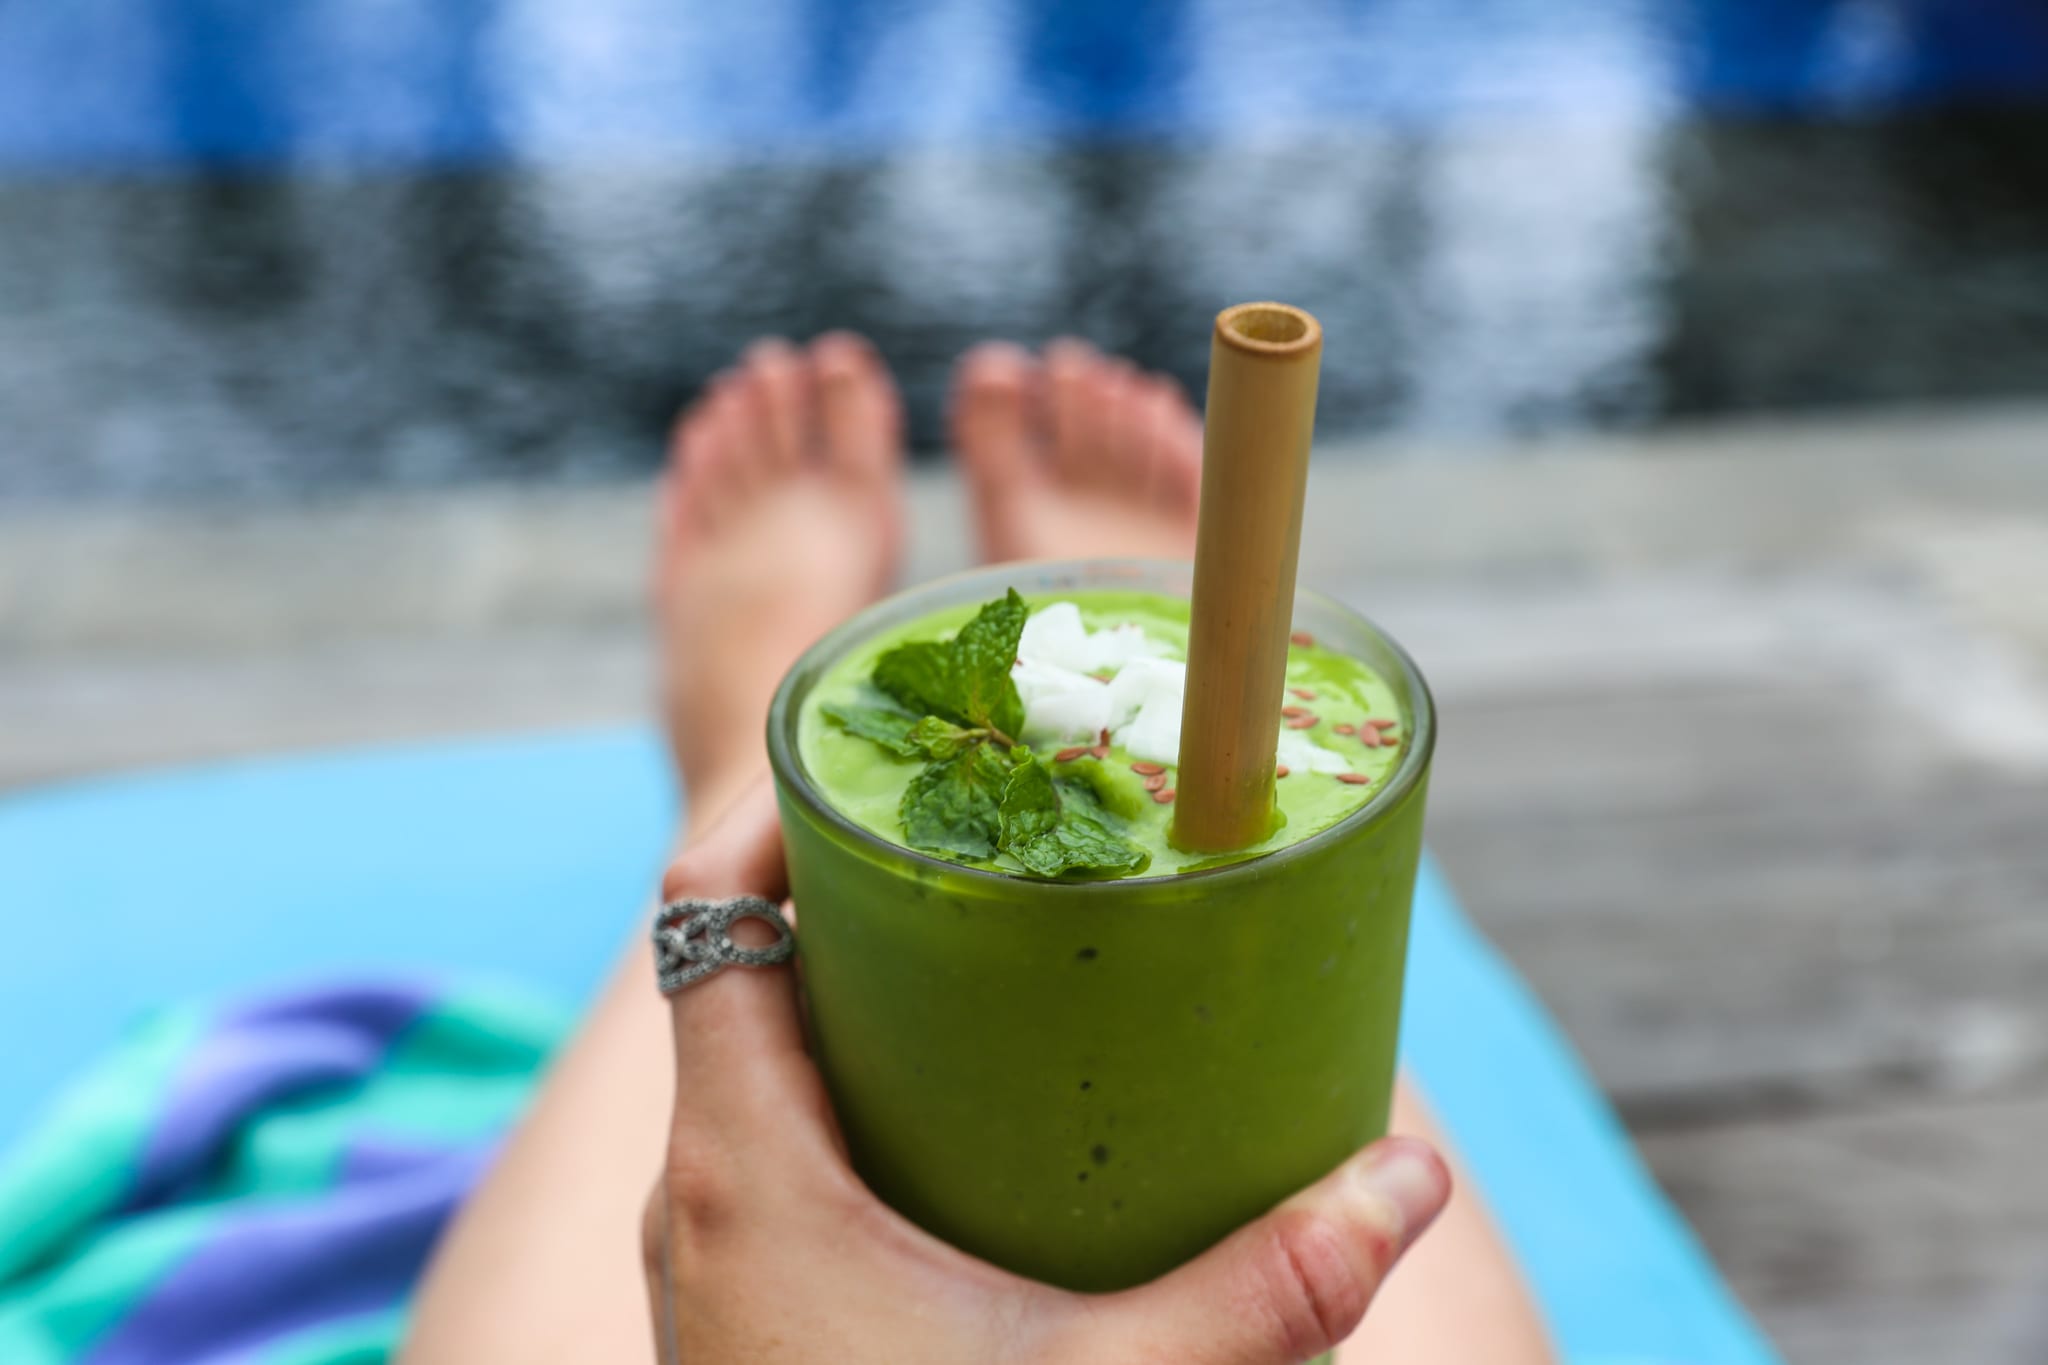 Chillhouse in Canggu Bali with green smoothie at pool 